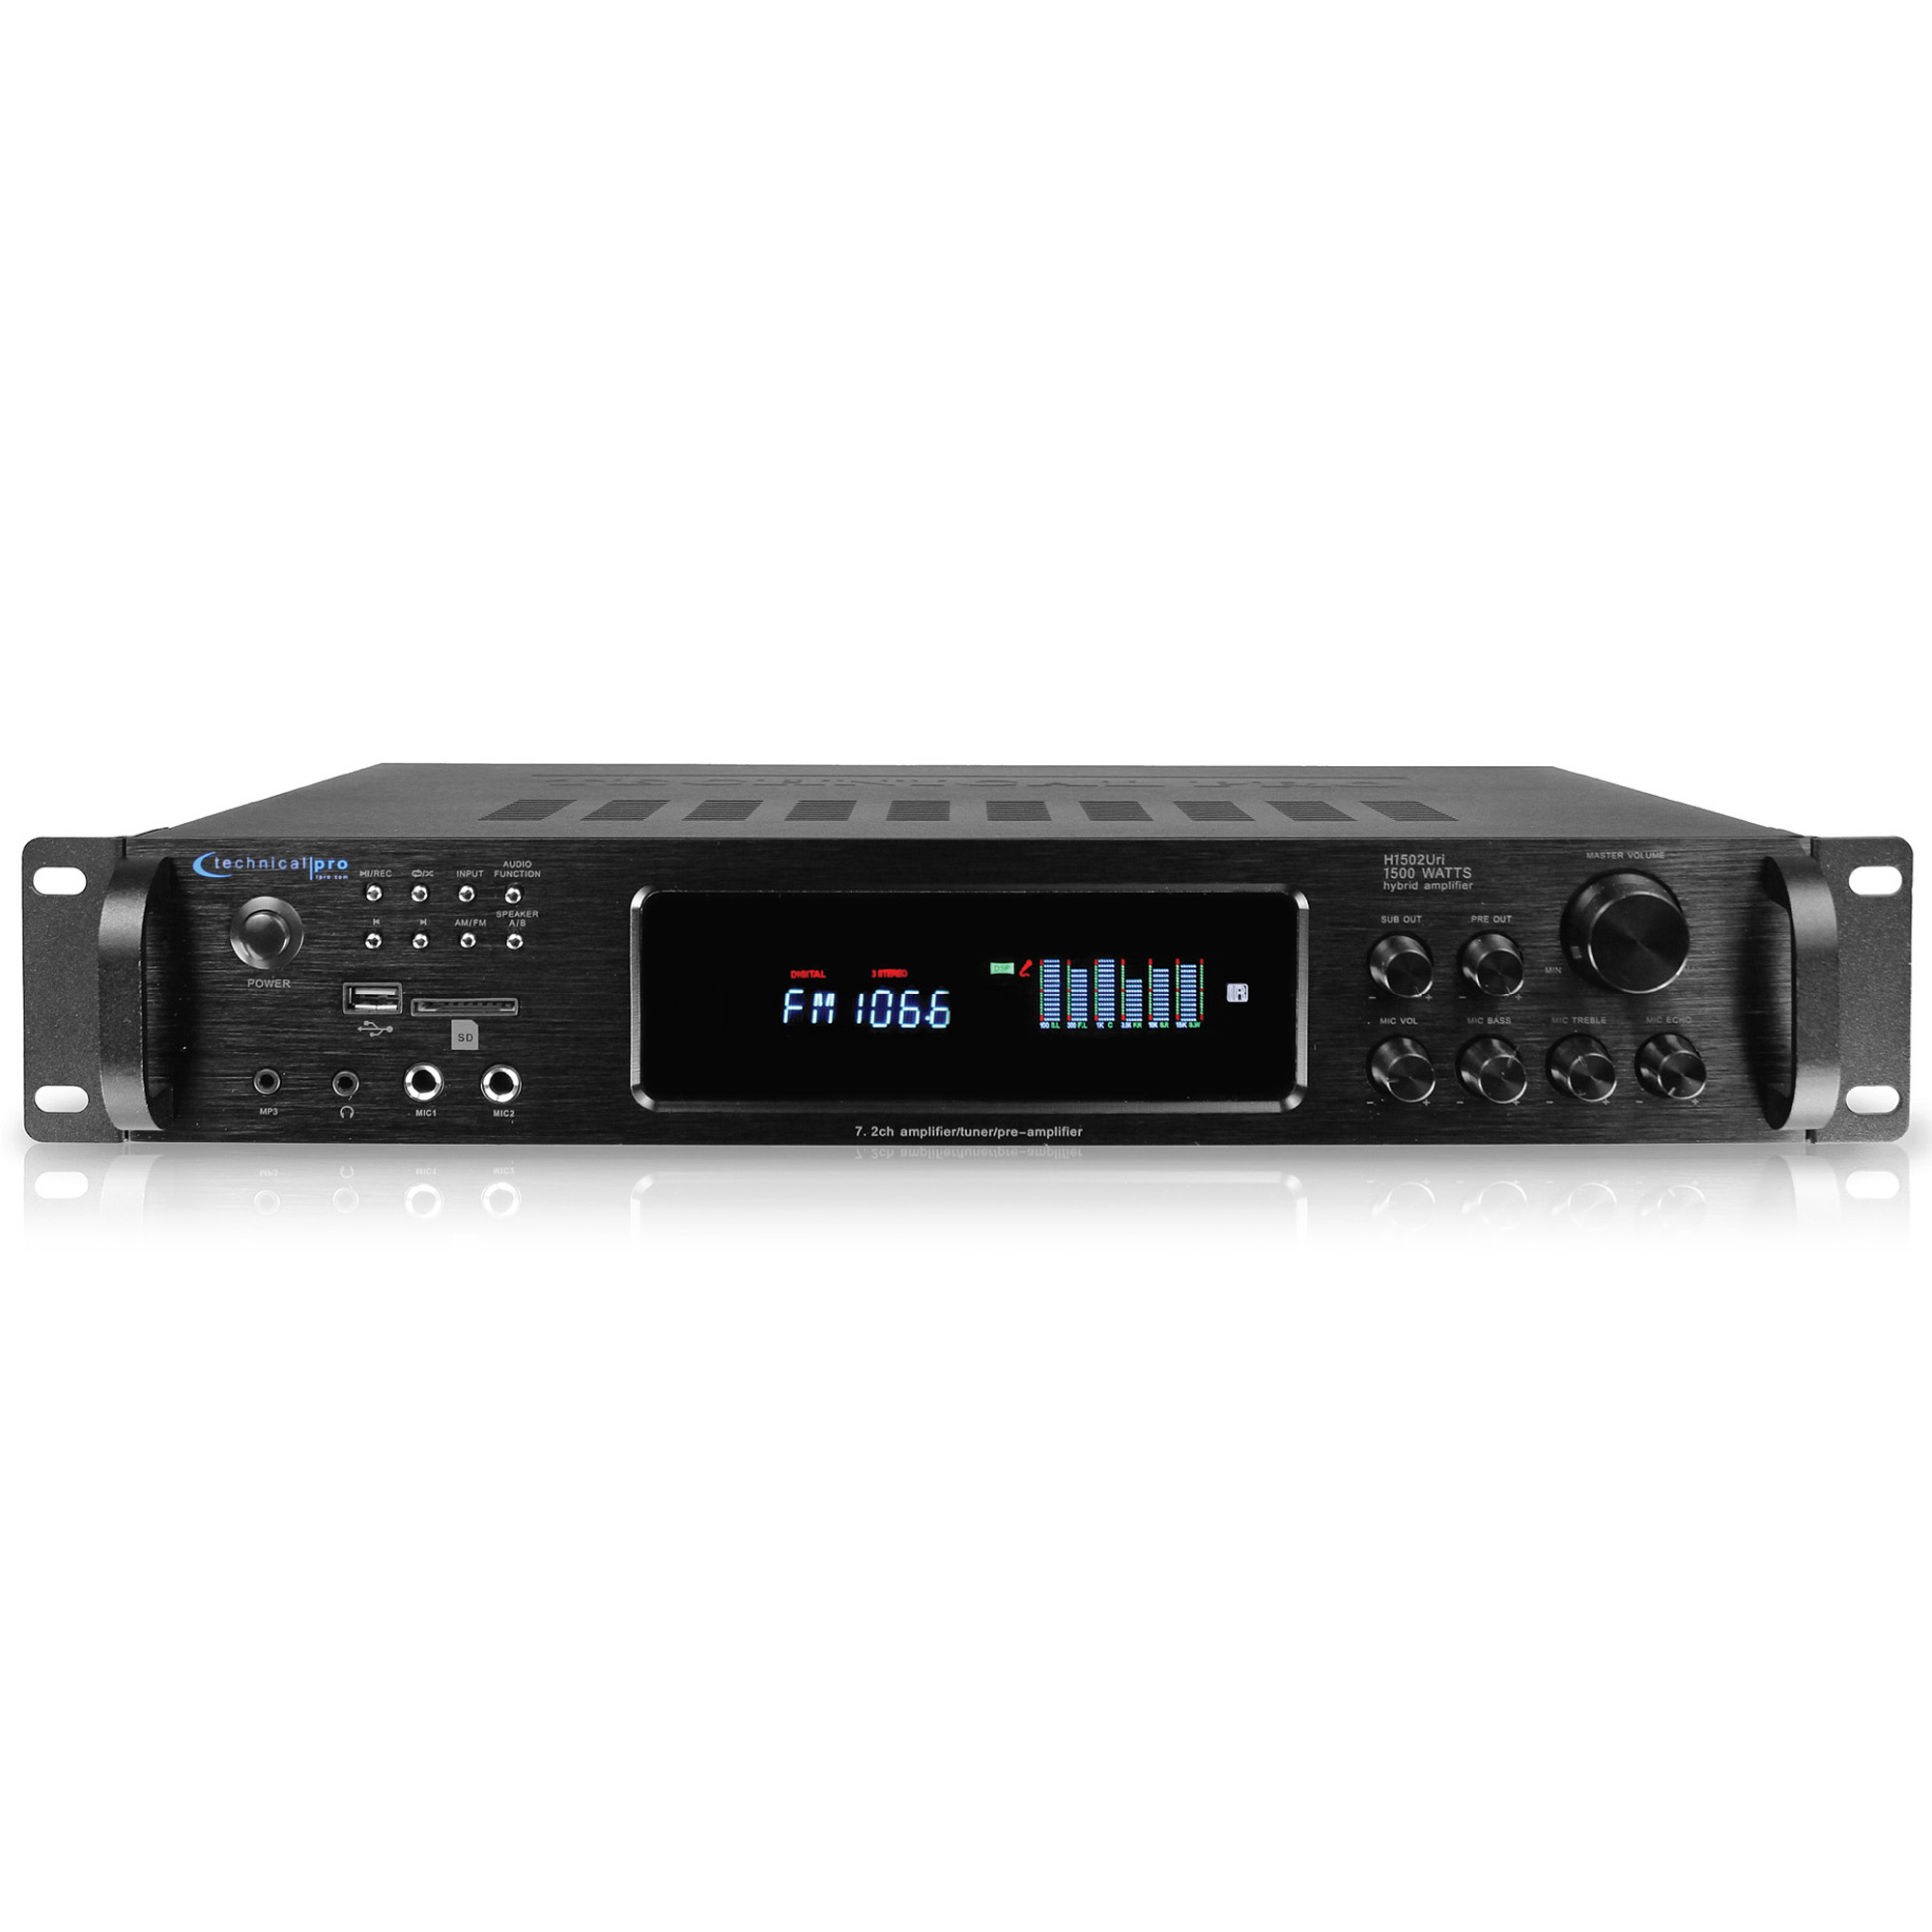 Technical Pro 1500 Watts Bluetooth Home Stereo Digital Multi Channel Hybrid Amplifier With USB SD Inputs, 2 Mic Inputs, AM/FM Digital Tuner